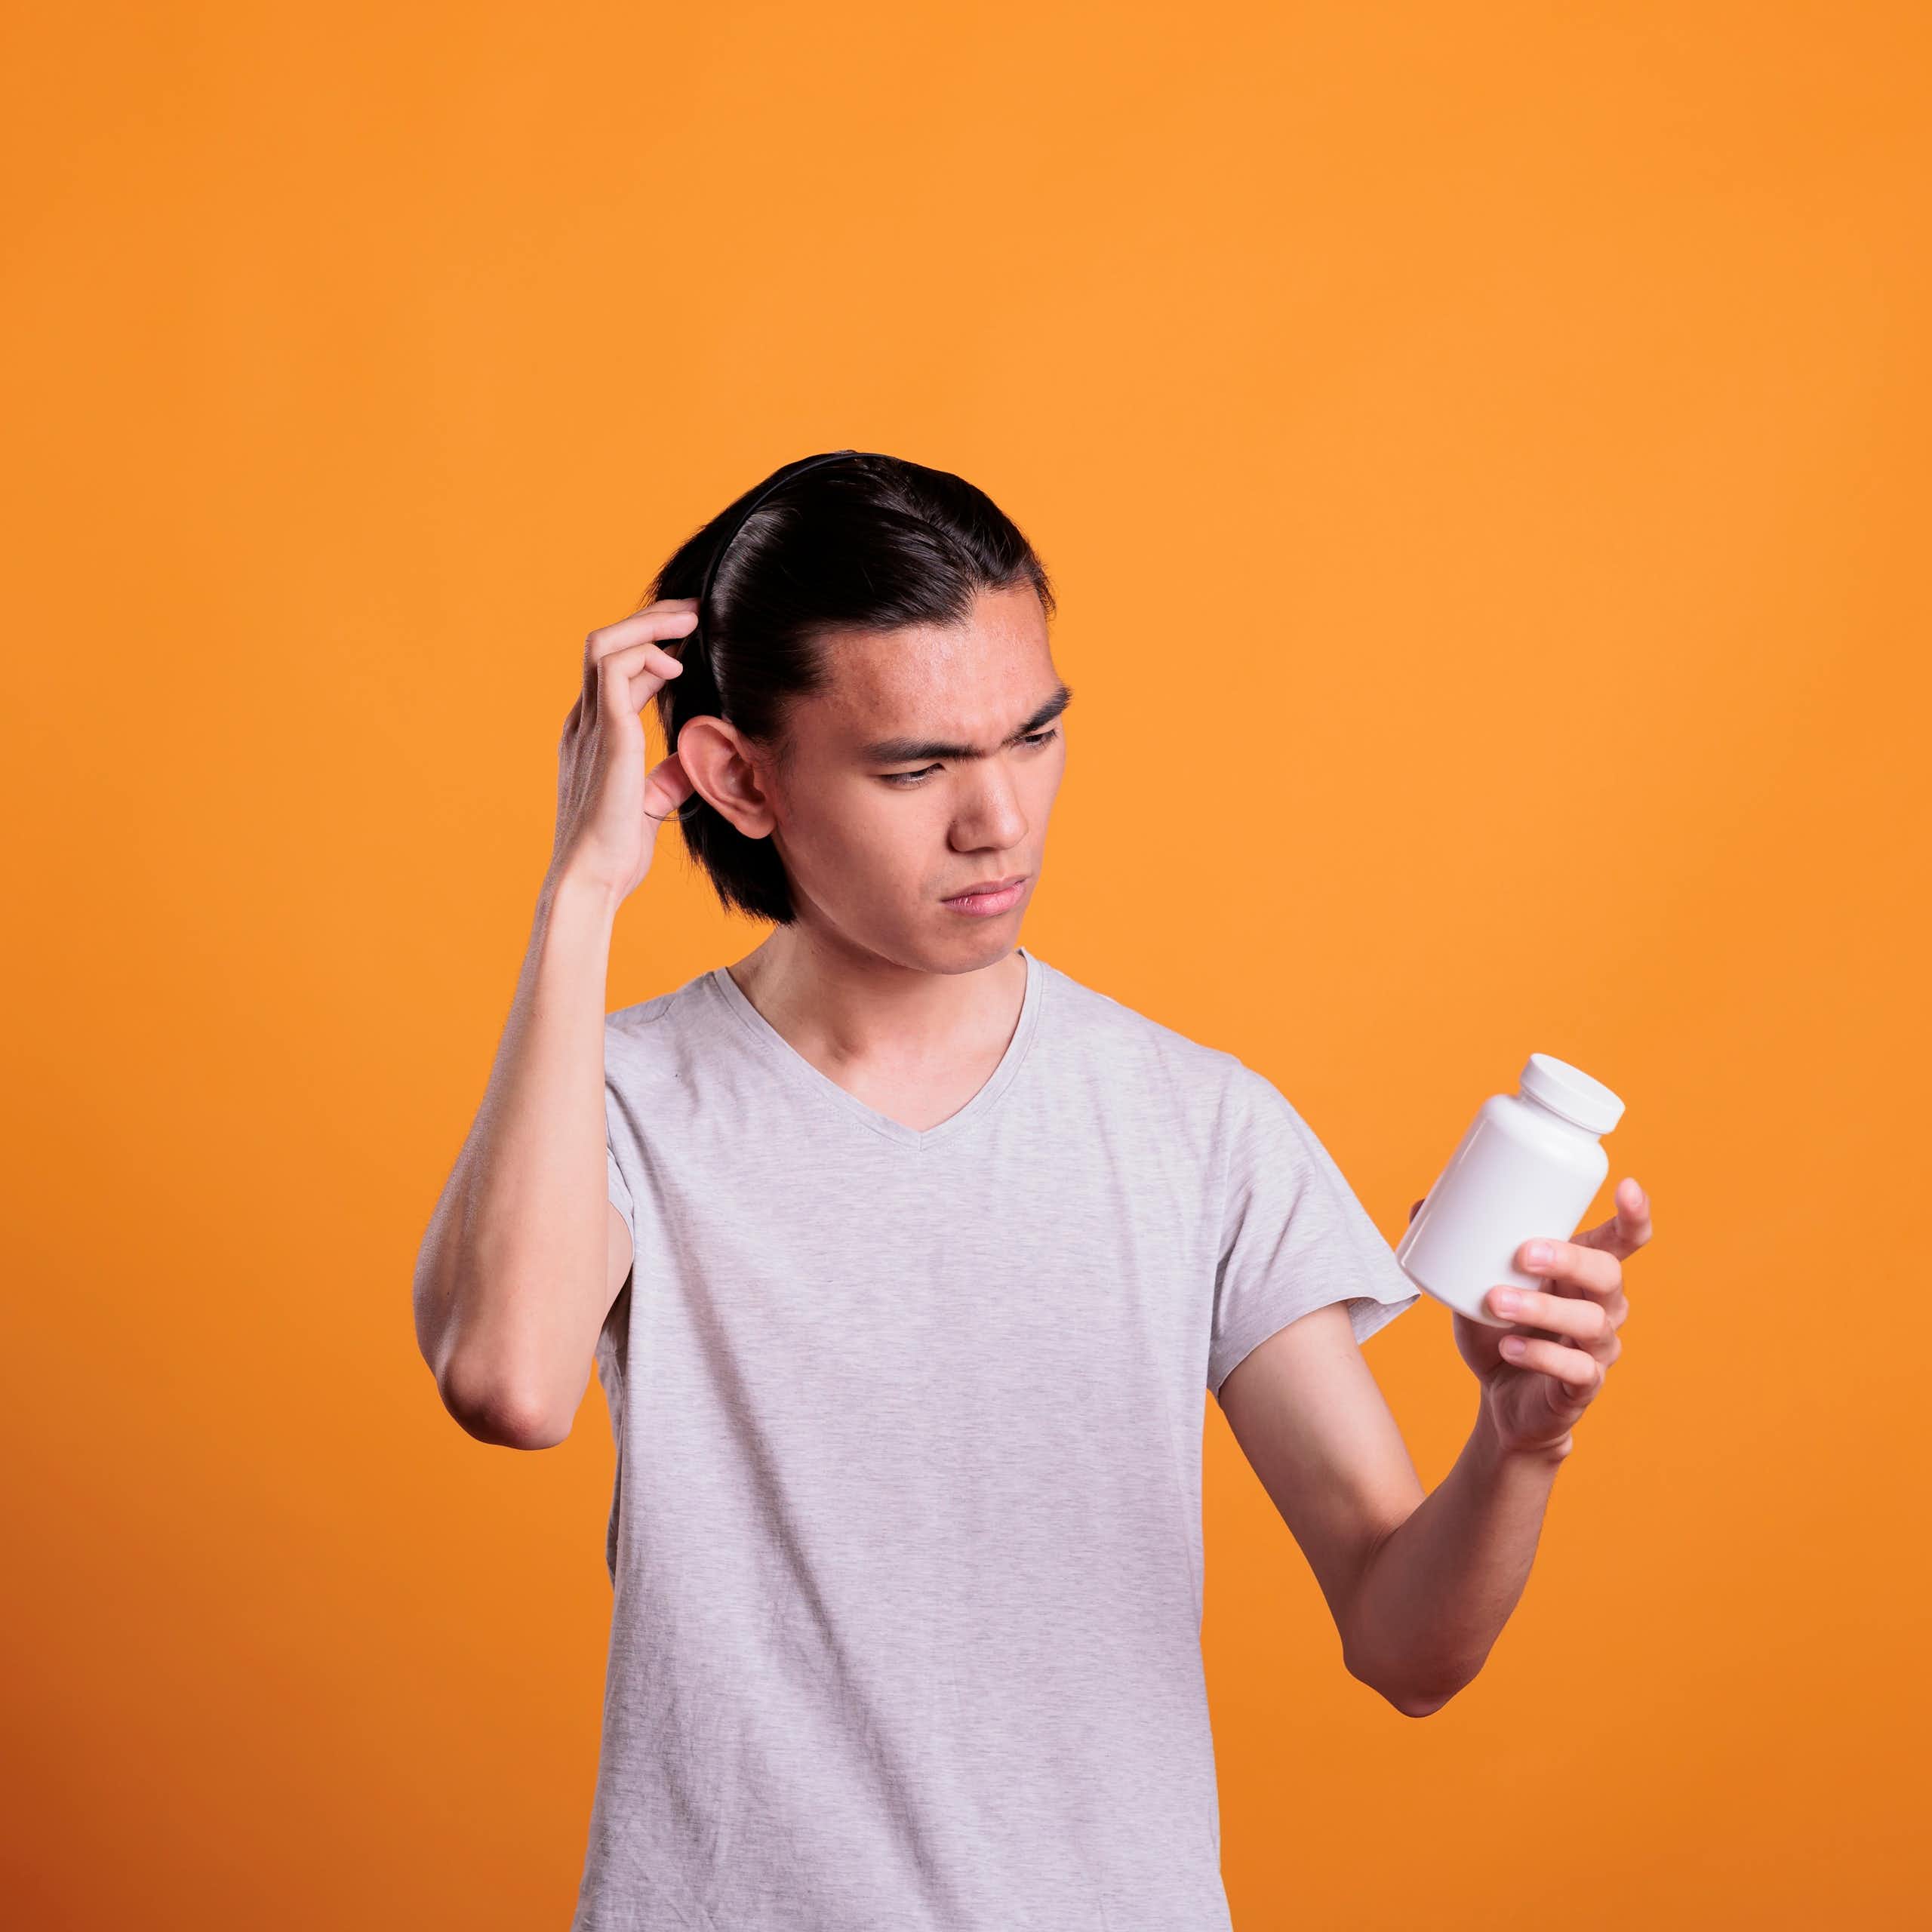 A man in a white T-shirt looking at a medication bottle against an orange background